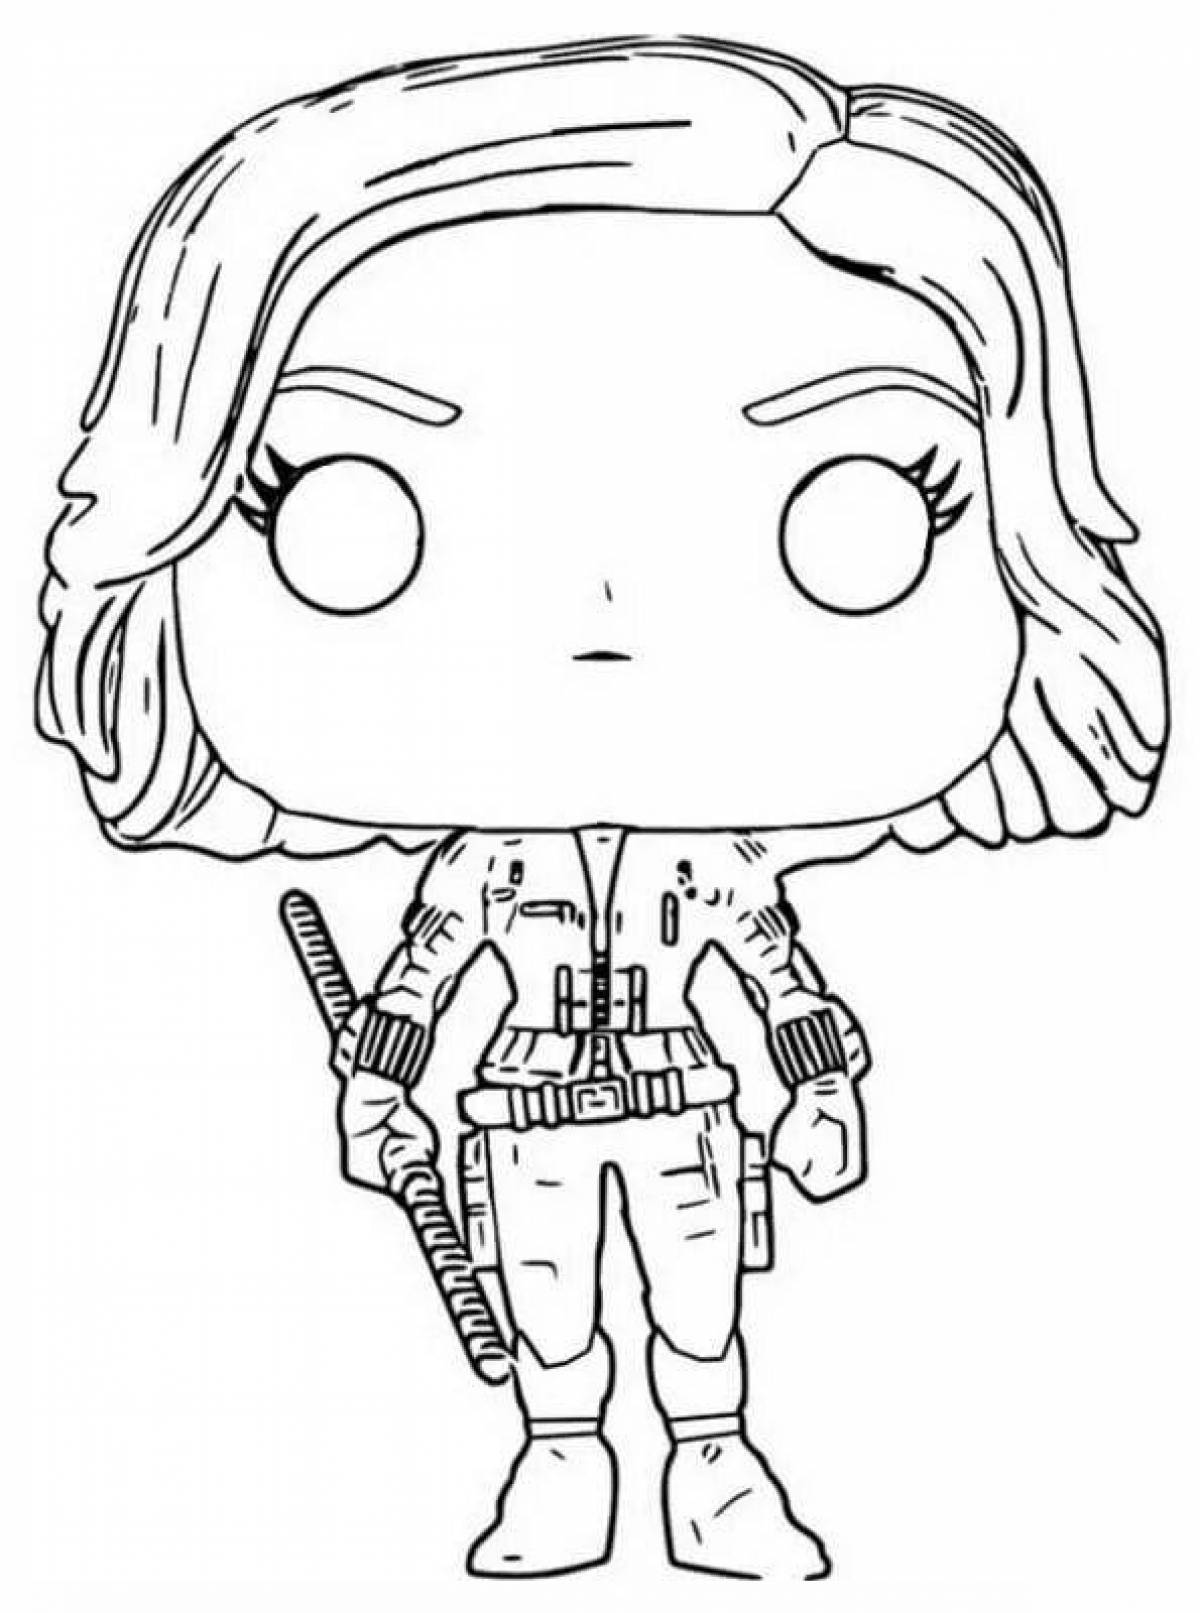 Amazing funko pop coloring page